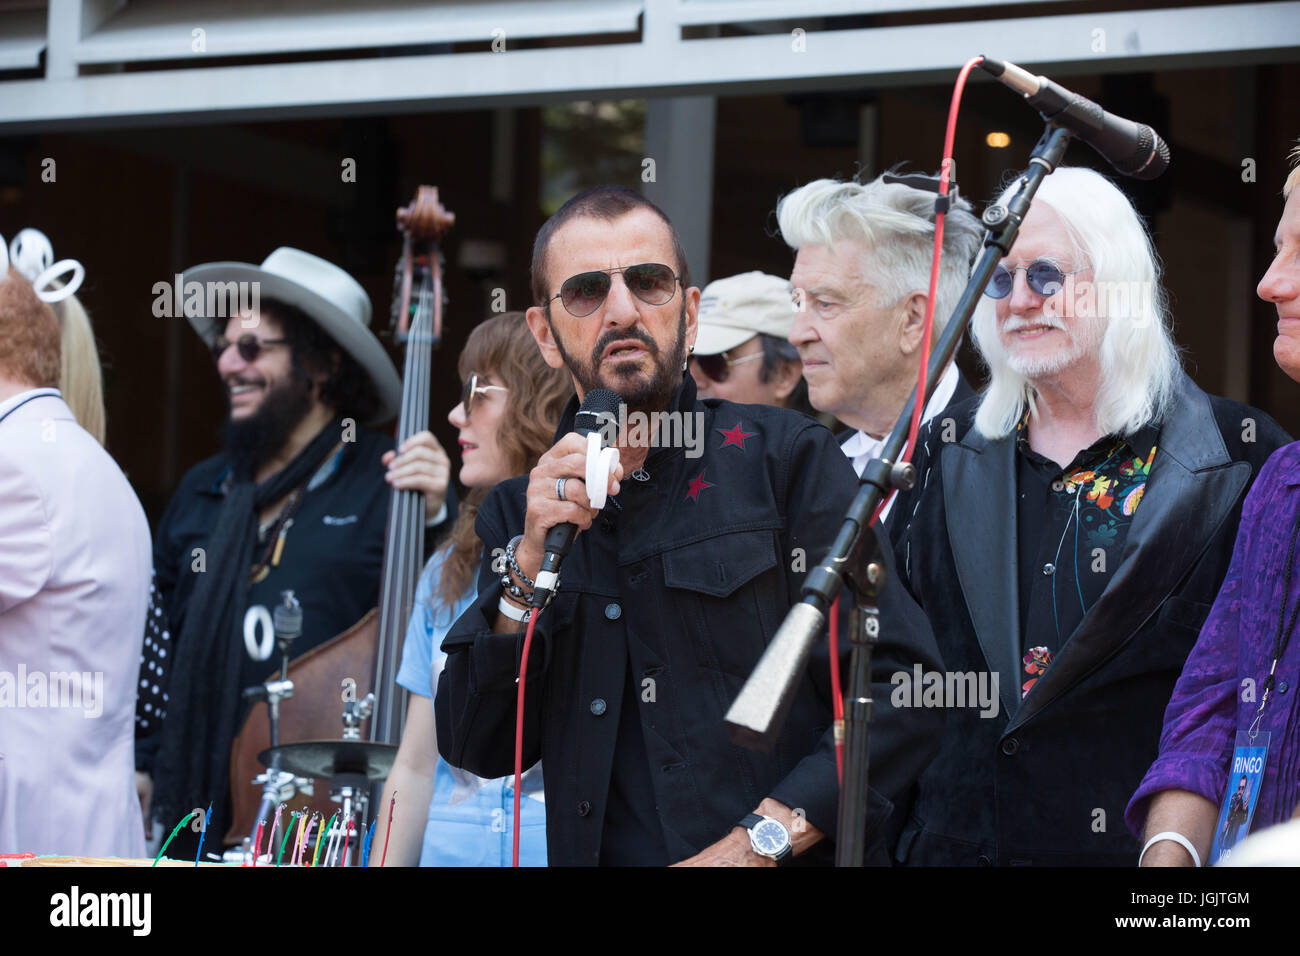 Hollywood,California,USA. 06th July,2017. Musician Ringo Starr appears his 'Peace & Love' 77th birthday celebration Capitol Records July 7,2017 Hollywood,California. Stock Photo